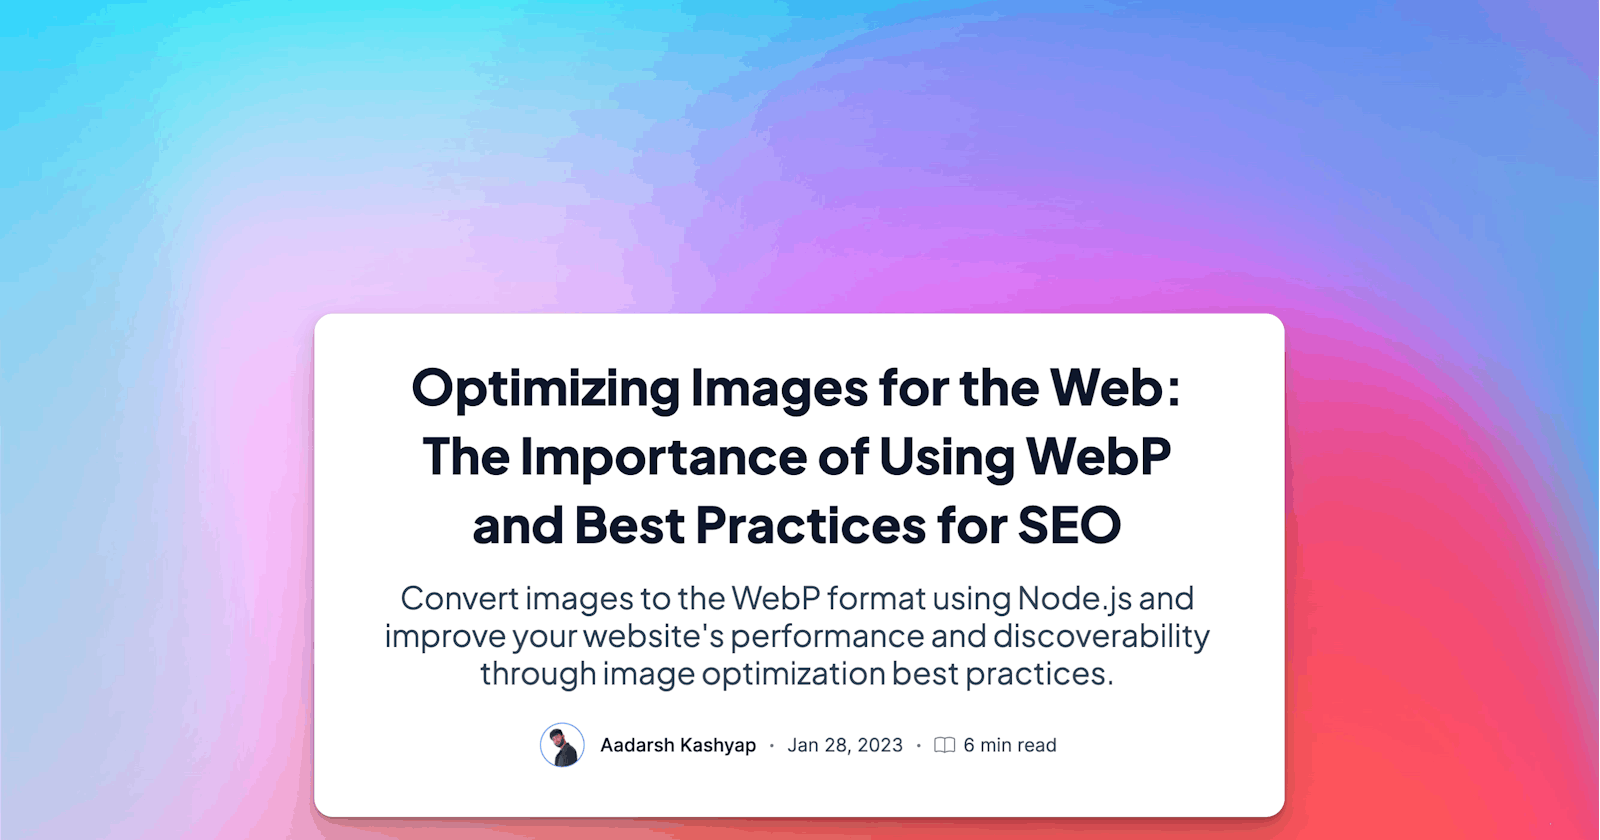 Optimizing Images for the Web: The Importance of Using WebP and Best Practices for SEO